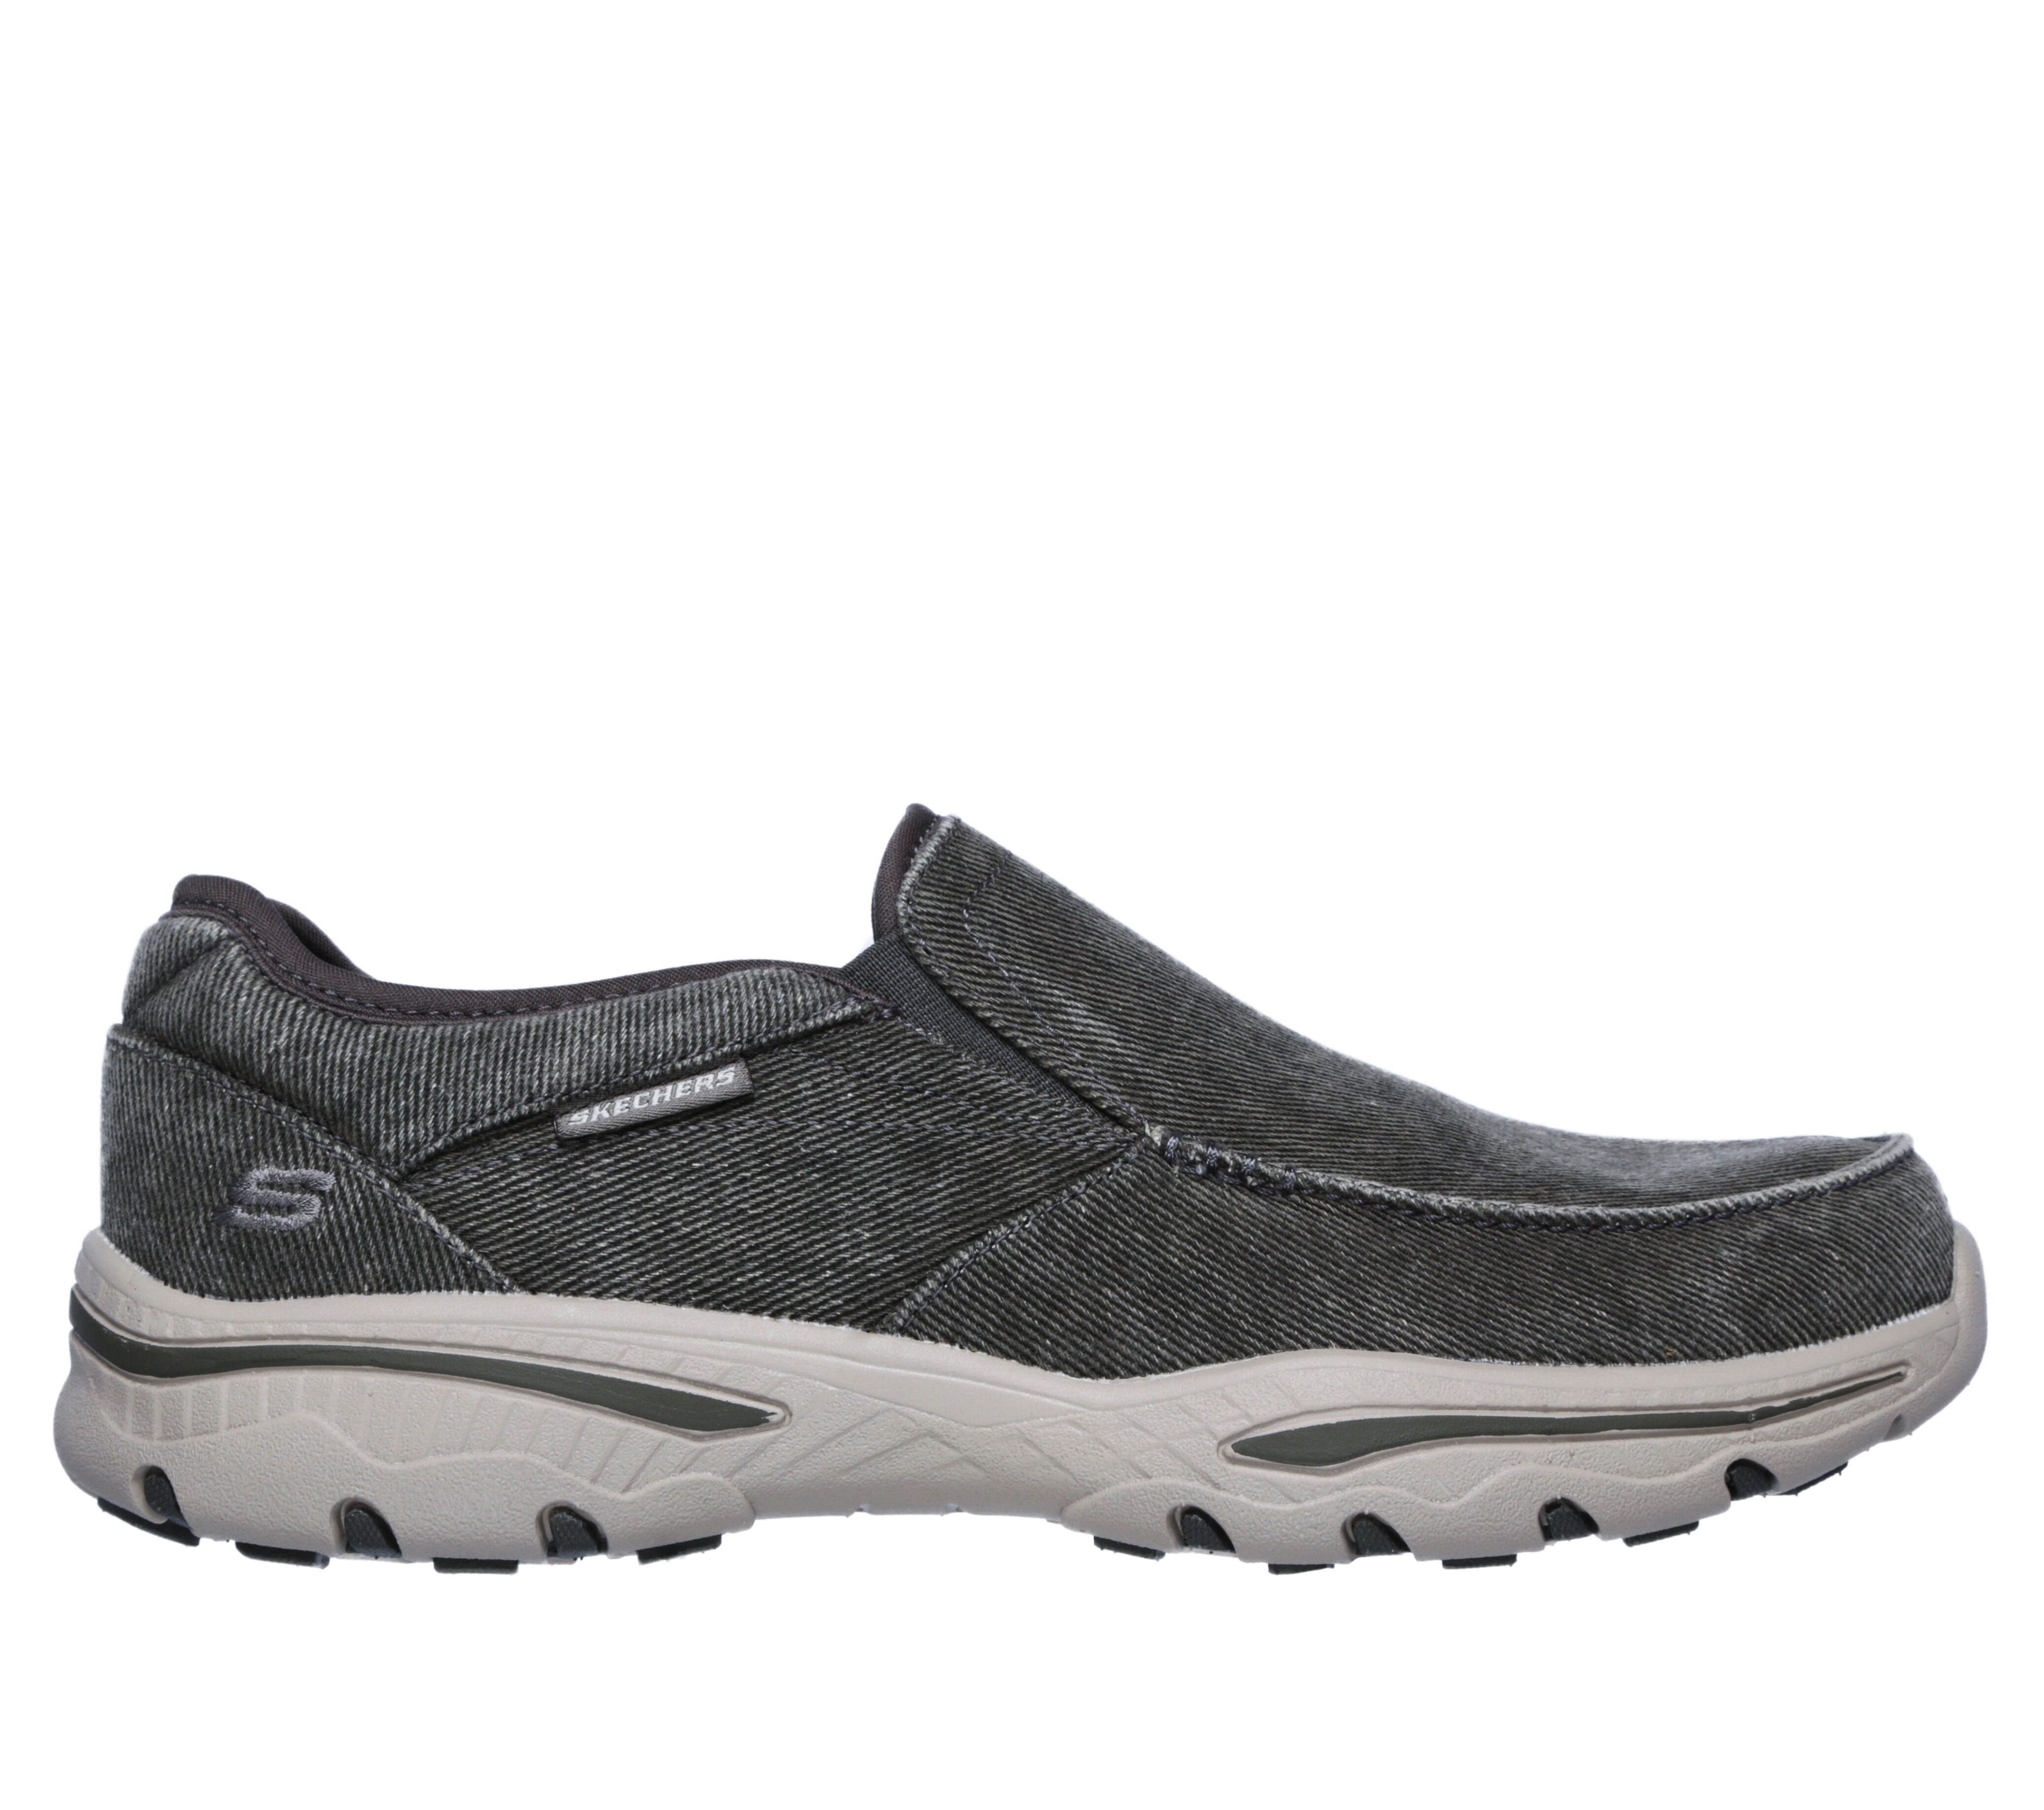 who sells skechers wide fit shoes